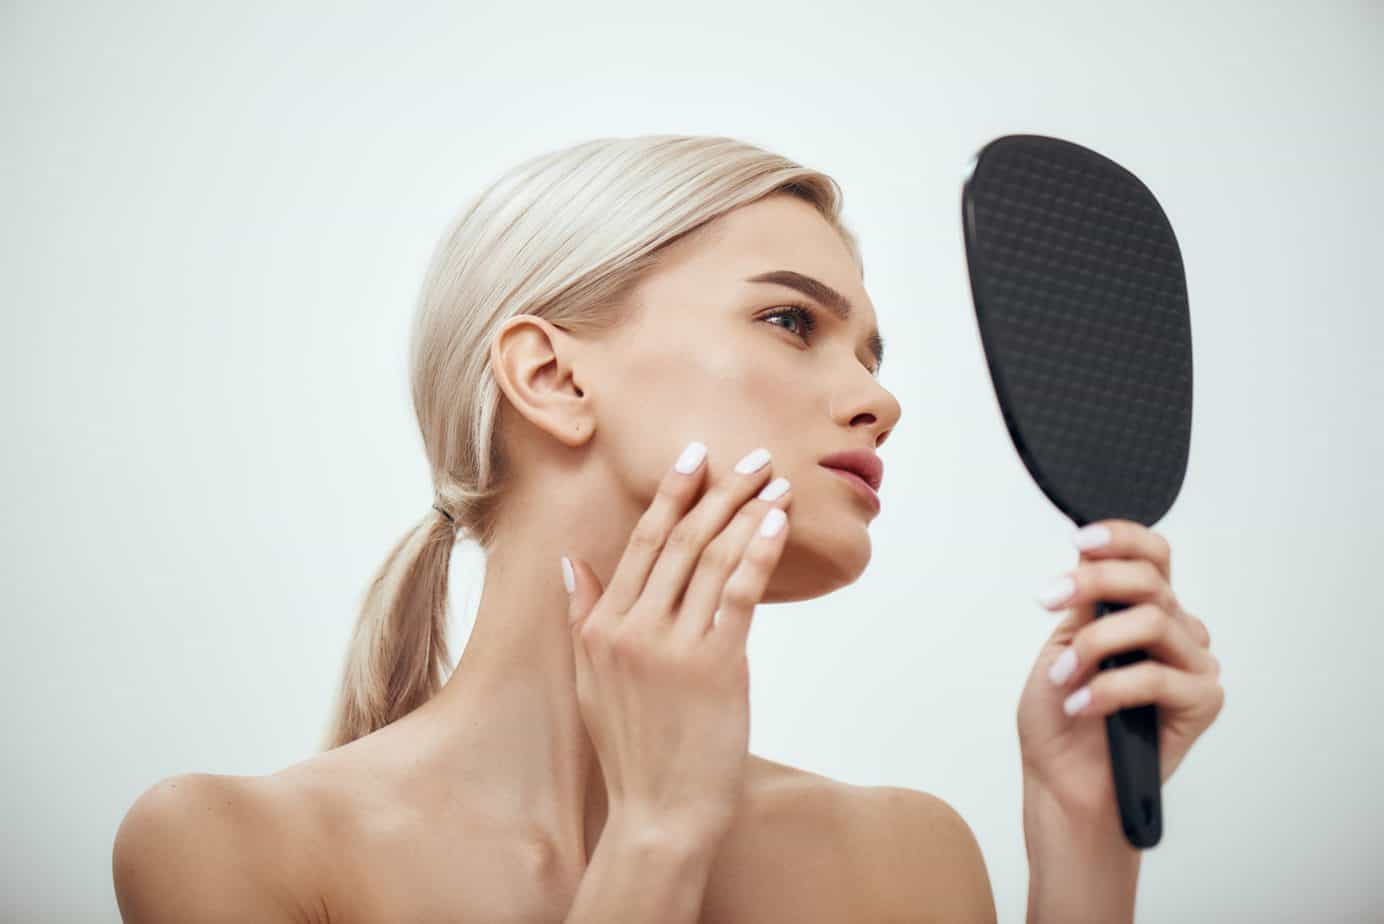 Want to enjoy beautiful and youthful skin? Find out what wrinkle ironing is all about